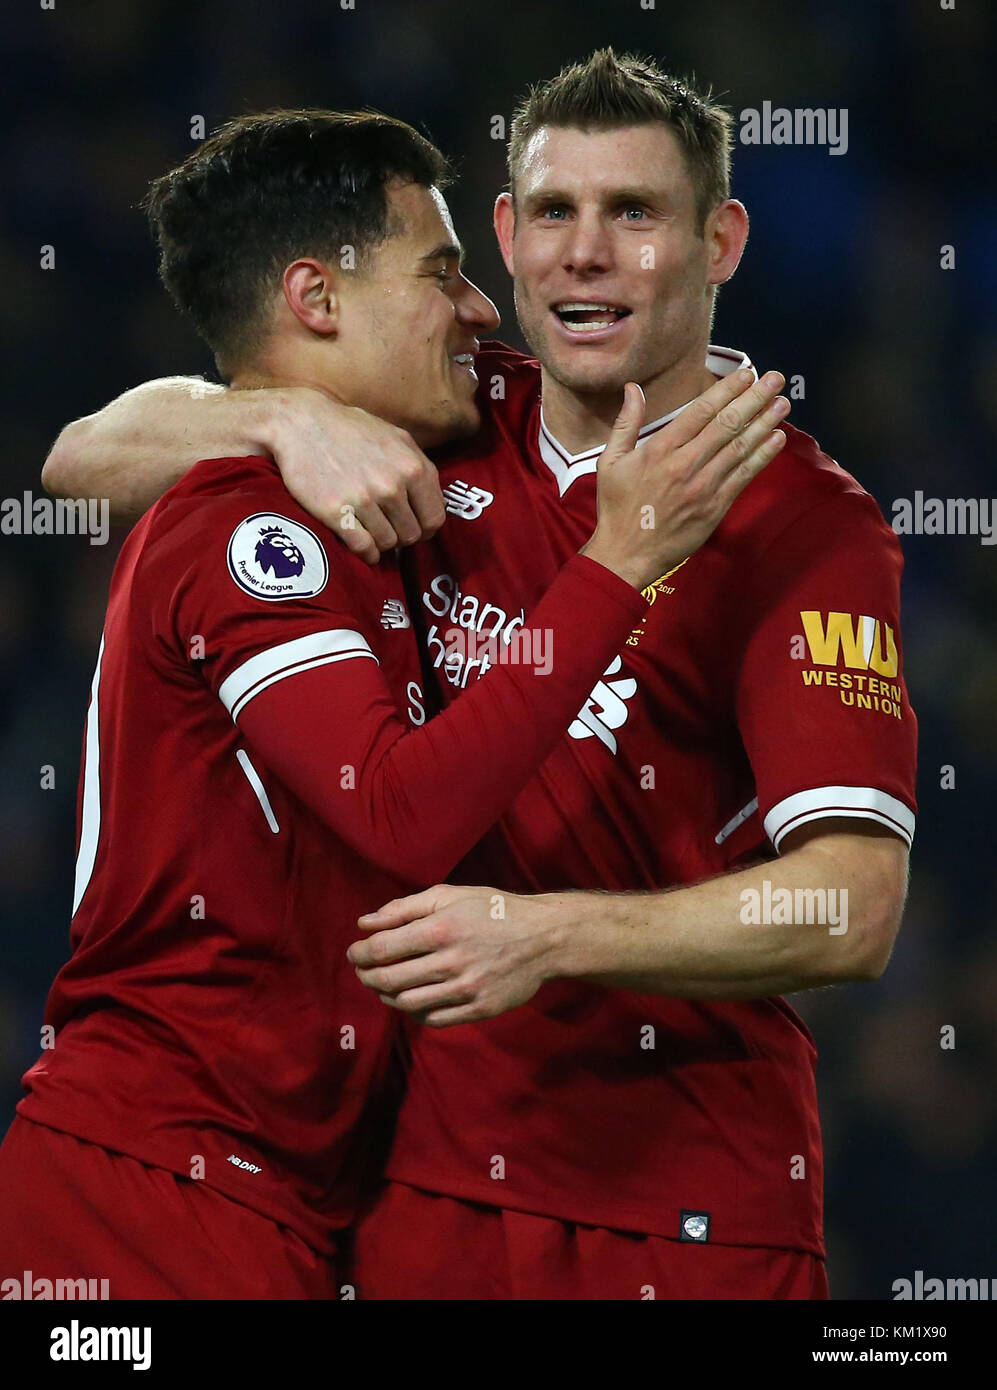 James Milner of Liverpool celebrates with goal scorer Philippe Coutinho during the Premier League match between Brighton and Hove Albion and Liverpool at the American Express Community Stadium in Brighton and Hove. 02 Dec 2017 *** EDITORIAL USE ONLY *** FA Premier League and Football League images are subject to DataCo Licence see www.football-dataco.com Stock Photo